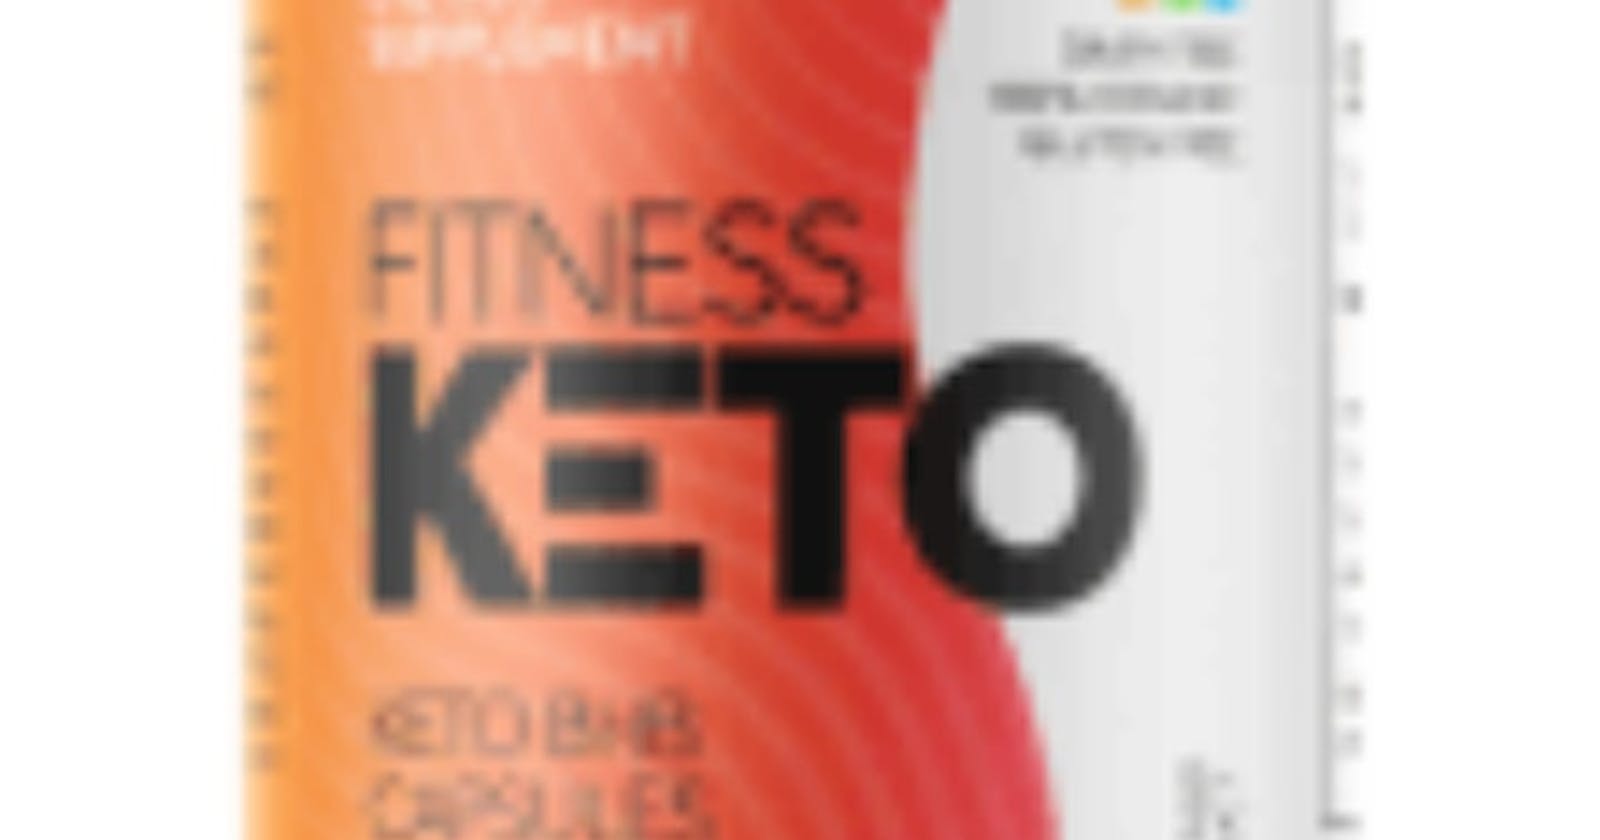 Fitness Keto Capsules NZ Reviews (Fraudulent Exposed) Is It Really Work?